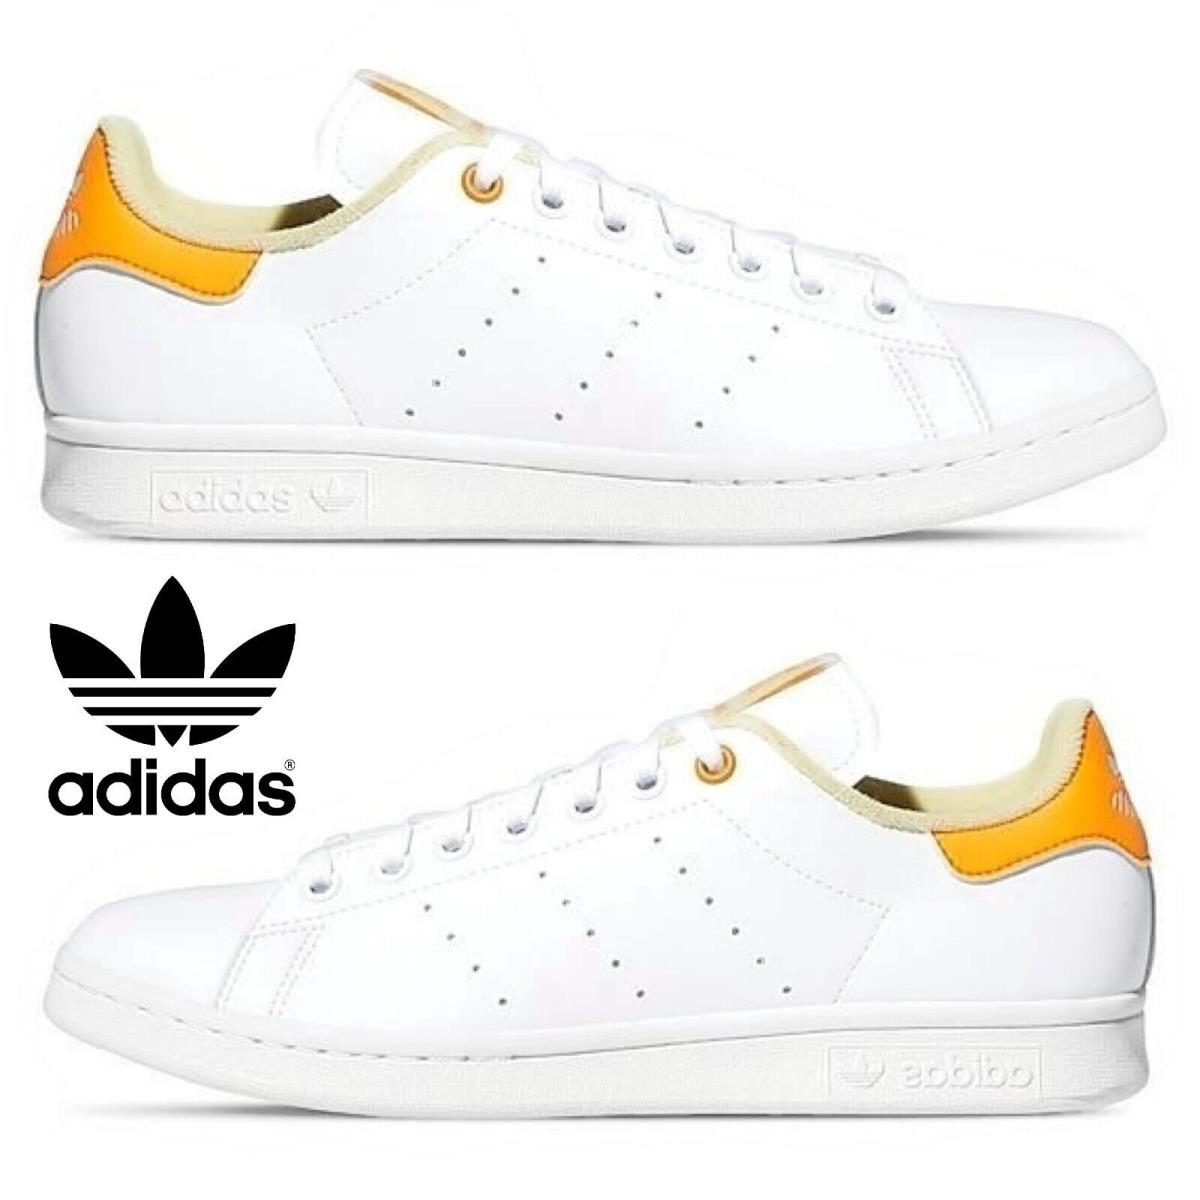 Adidas Originals Stan Smith Women s Sneakers Casual Shoes Sport Gym White Yellow